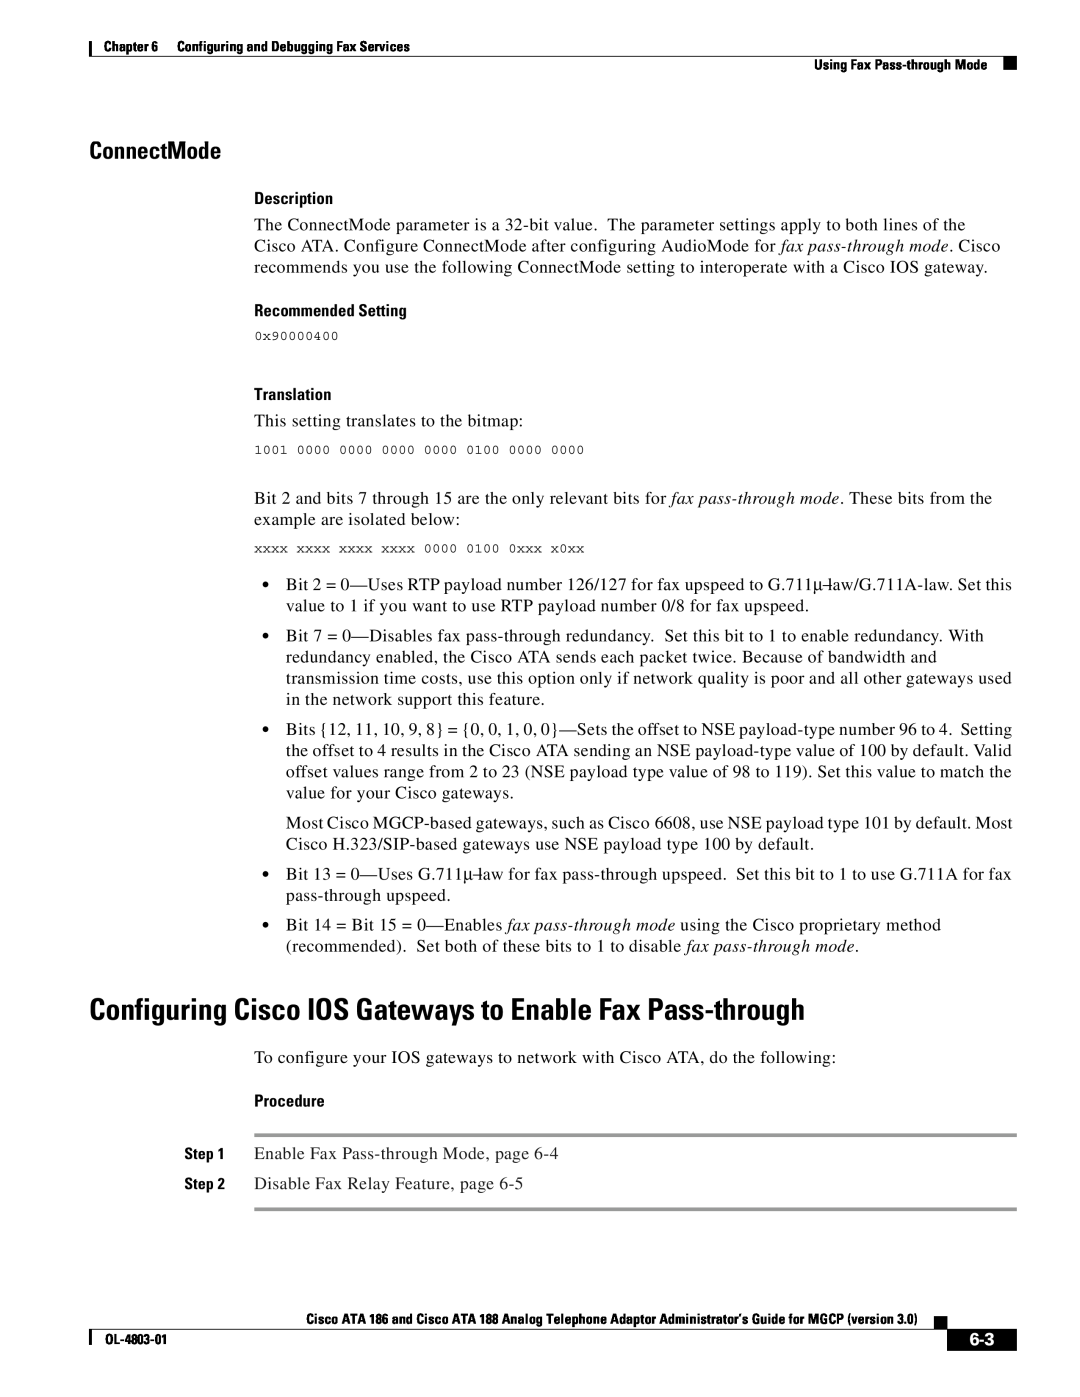 Cisco Systems ATA 186 manual Configuring Cisco IOS Gateways to Enable Fax Pass-through, ConnectMode, Recommended Setting 